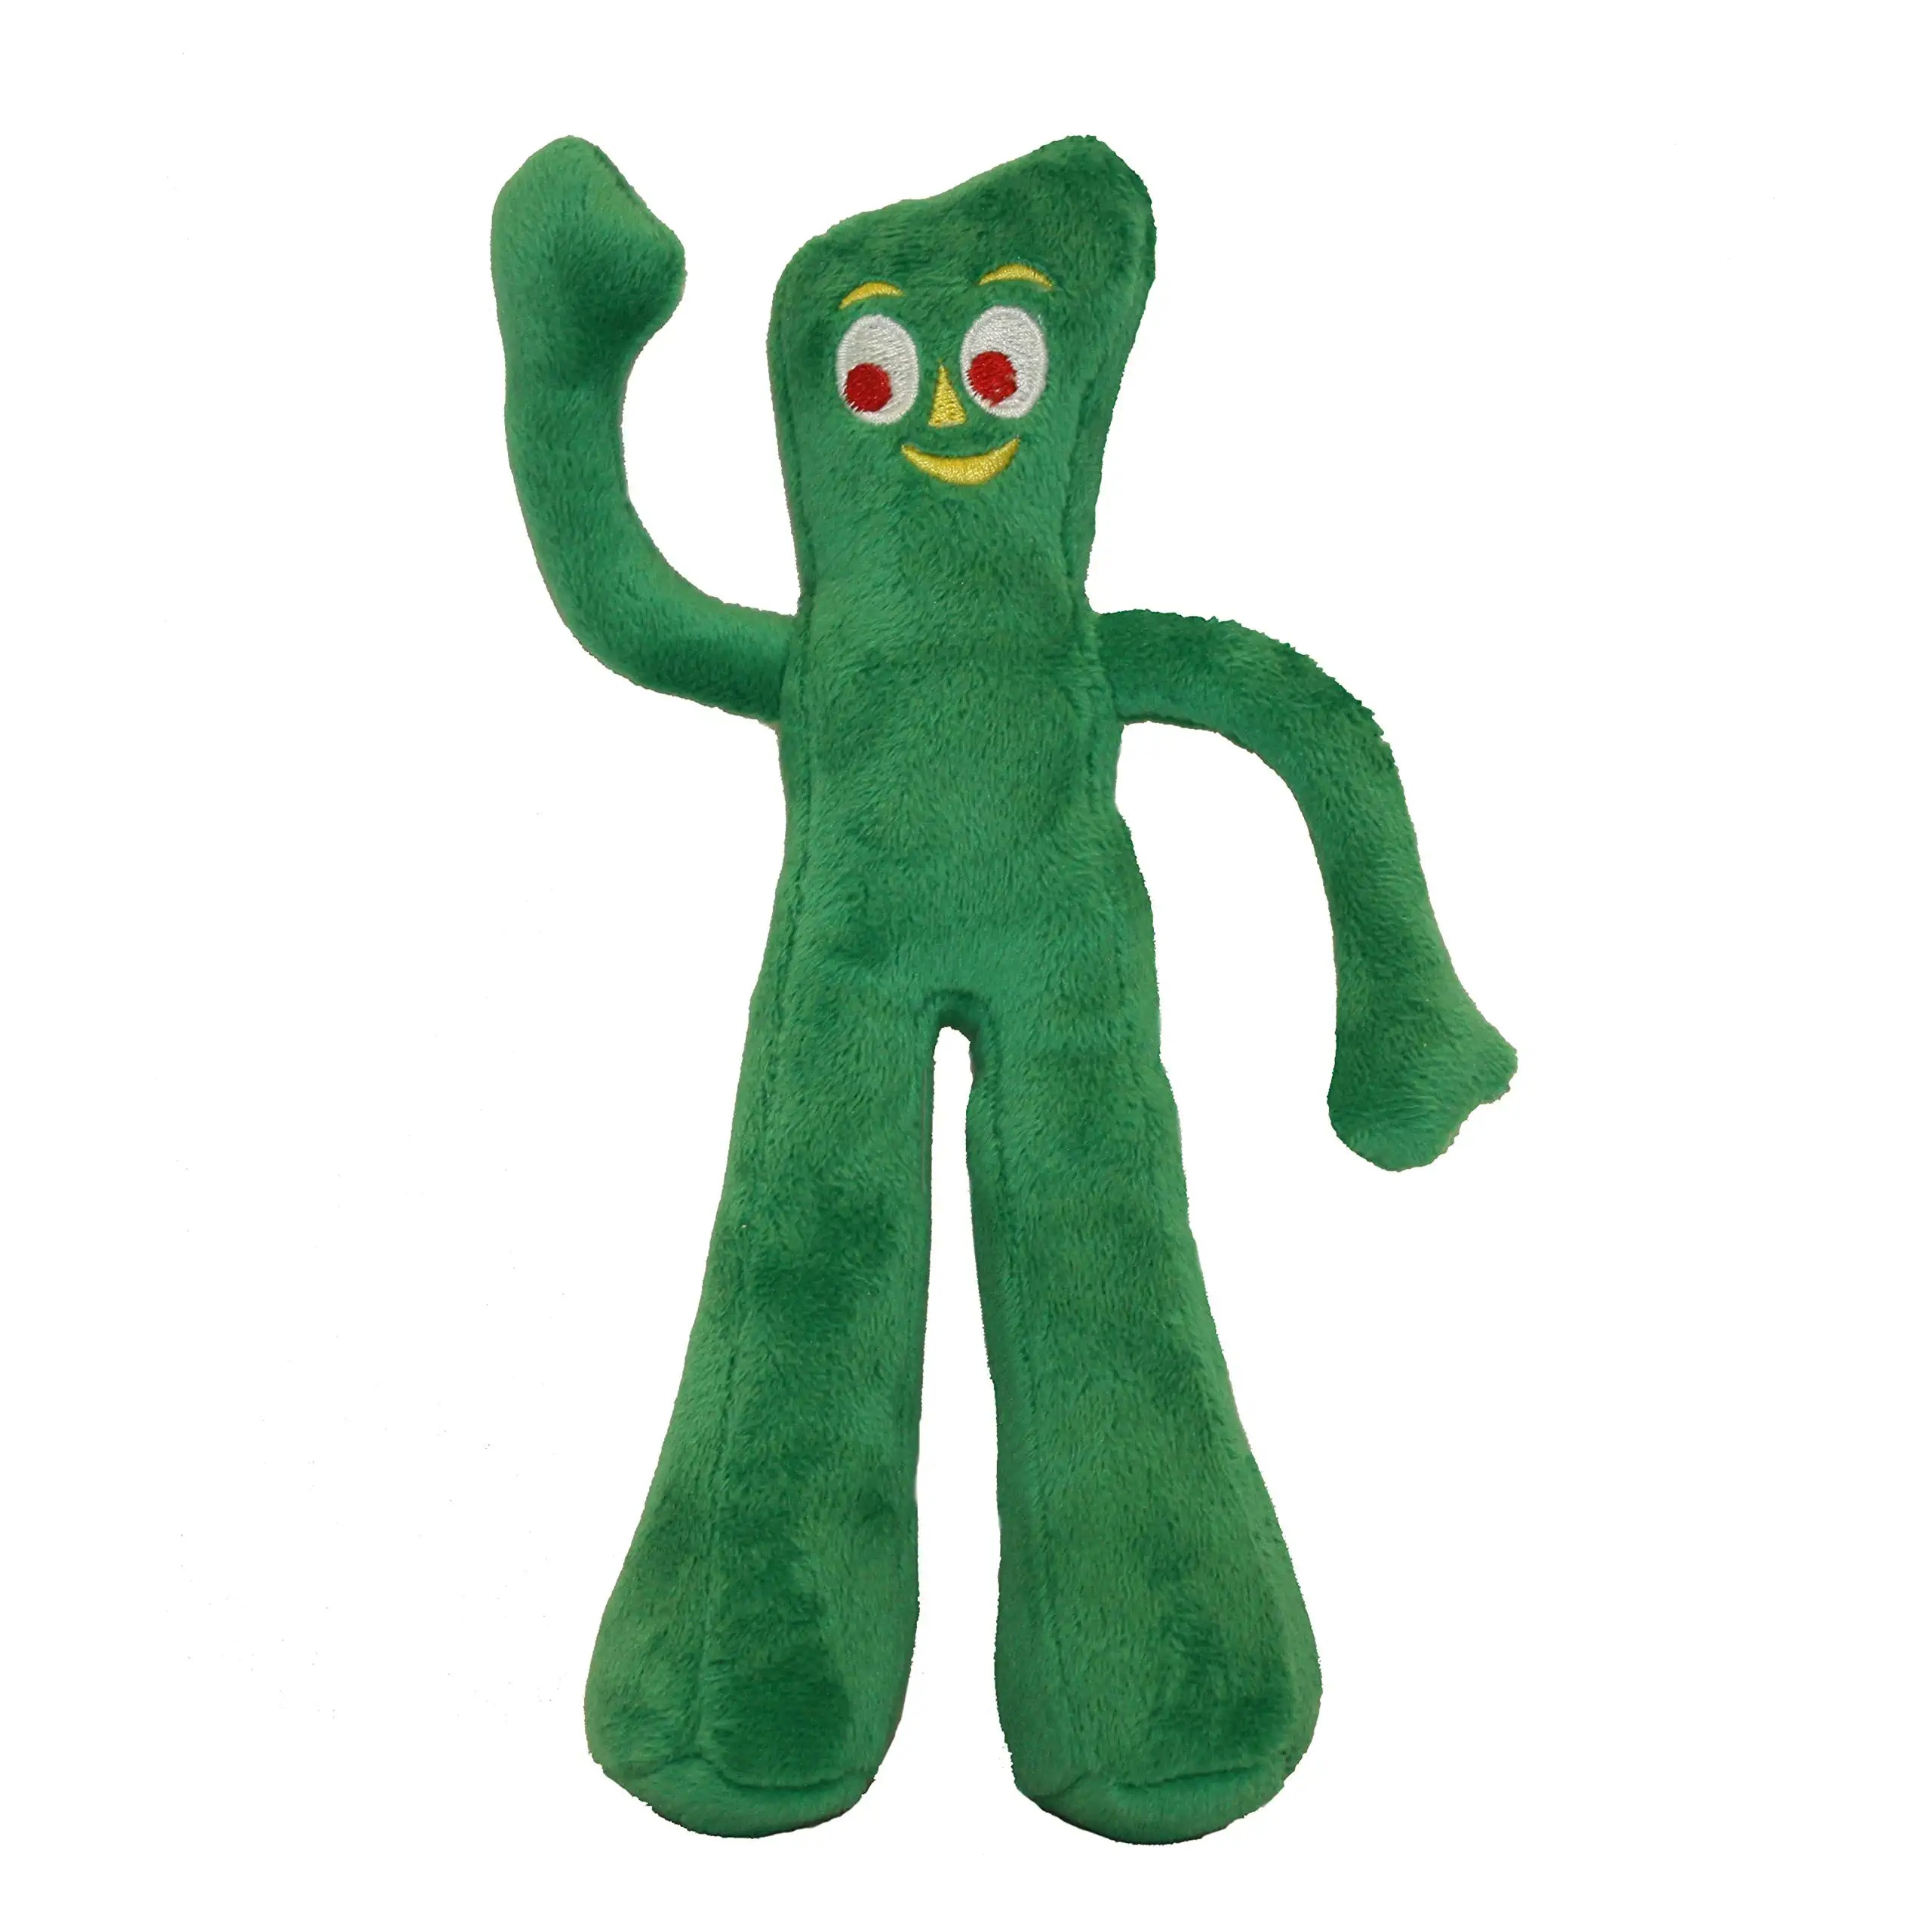 Green Plush Filled Dog Toy, 9 inch 